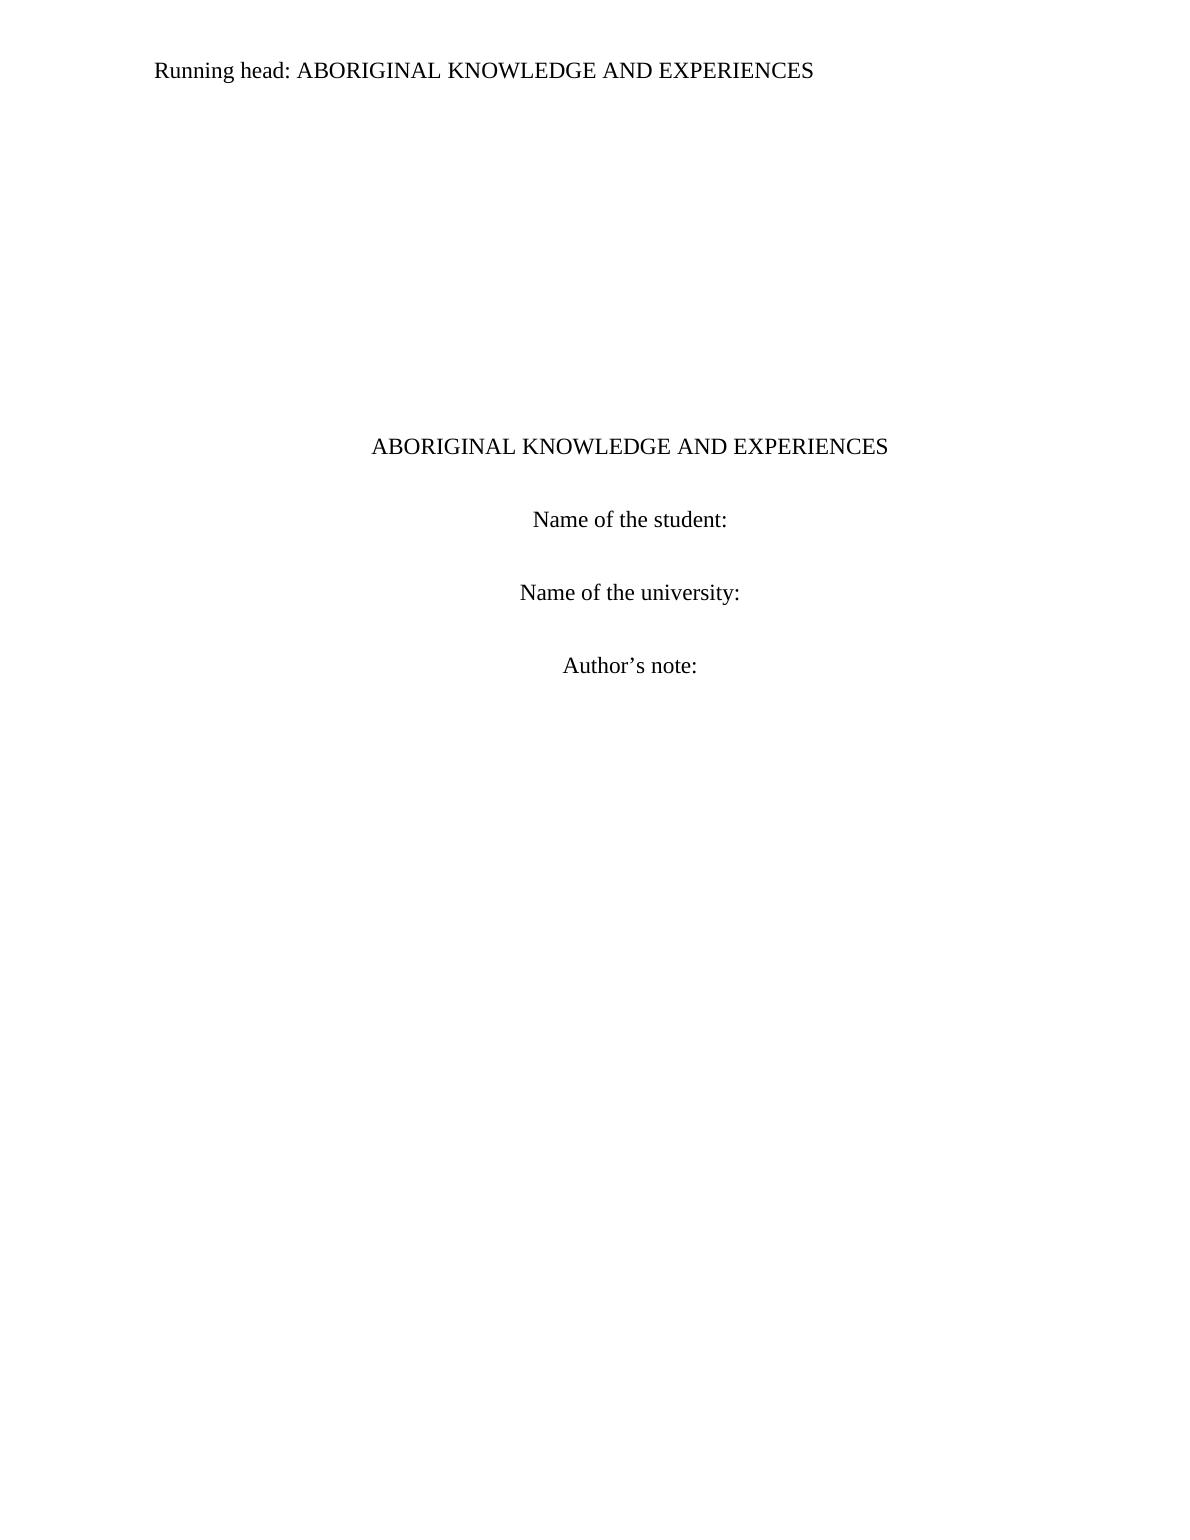 Assignment on Aboriginal Knowledge and Experiences_1